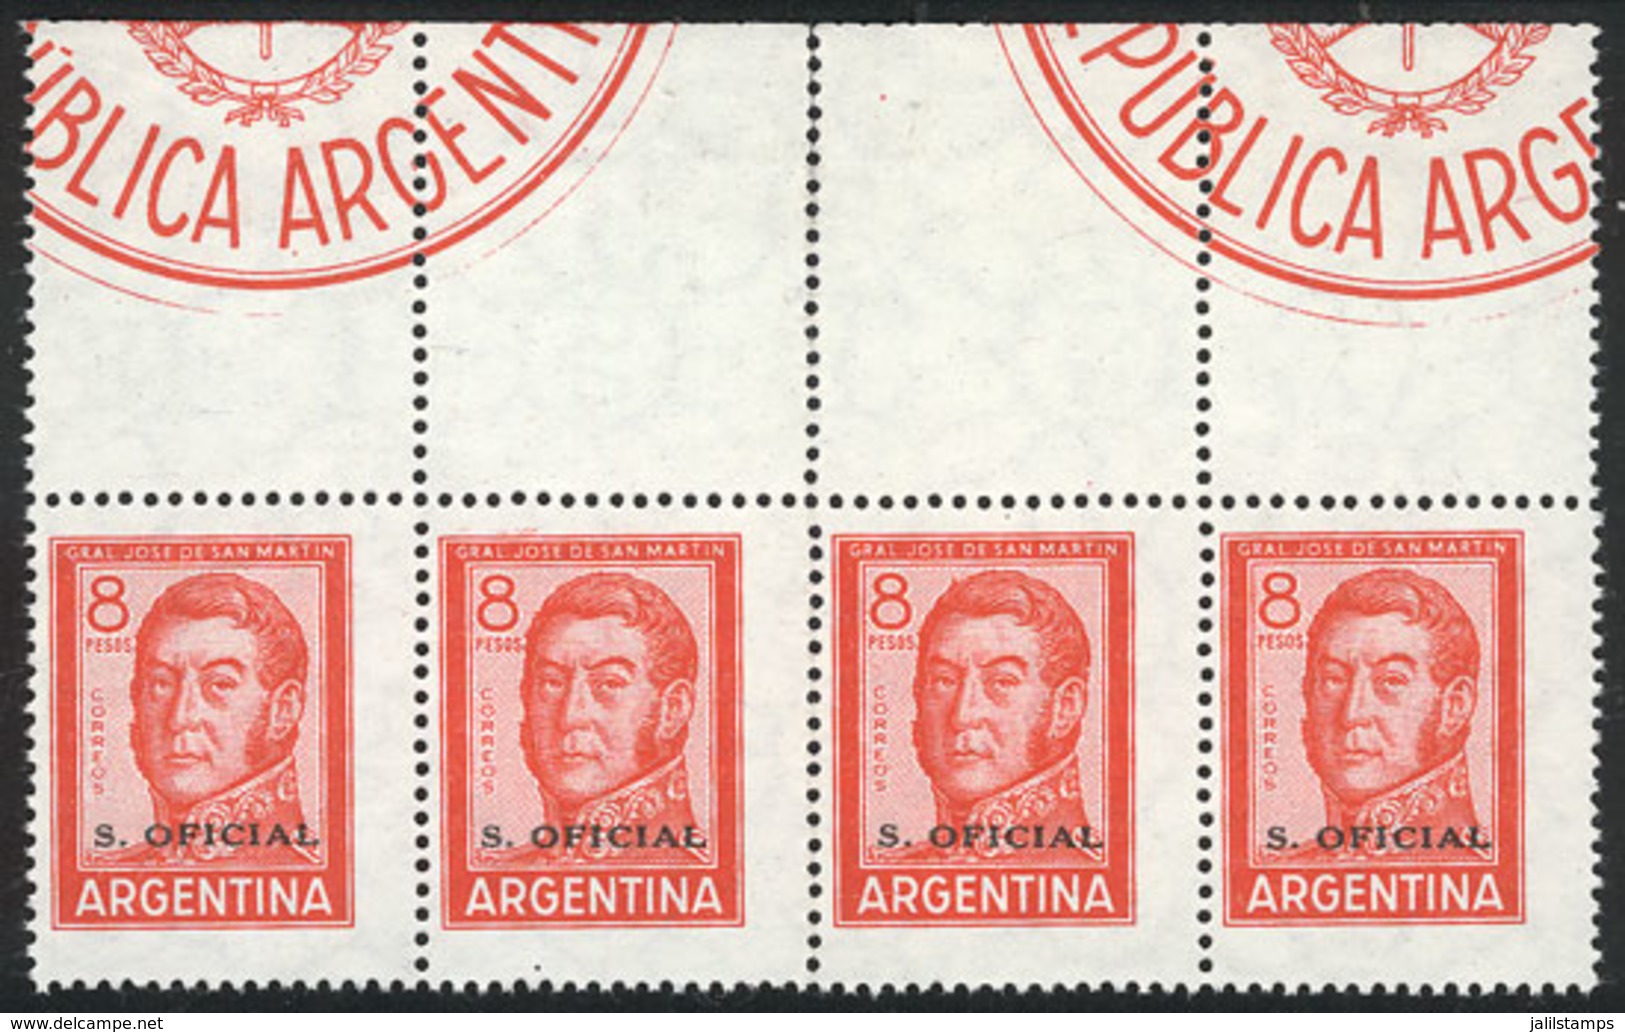 ARGENTINA: GJ.750CA, 8P. San Martín, Strip Of 4 WITH LABELS AT TOP, Uncatalogued, MNH, Very Fine! - Officials